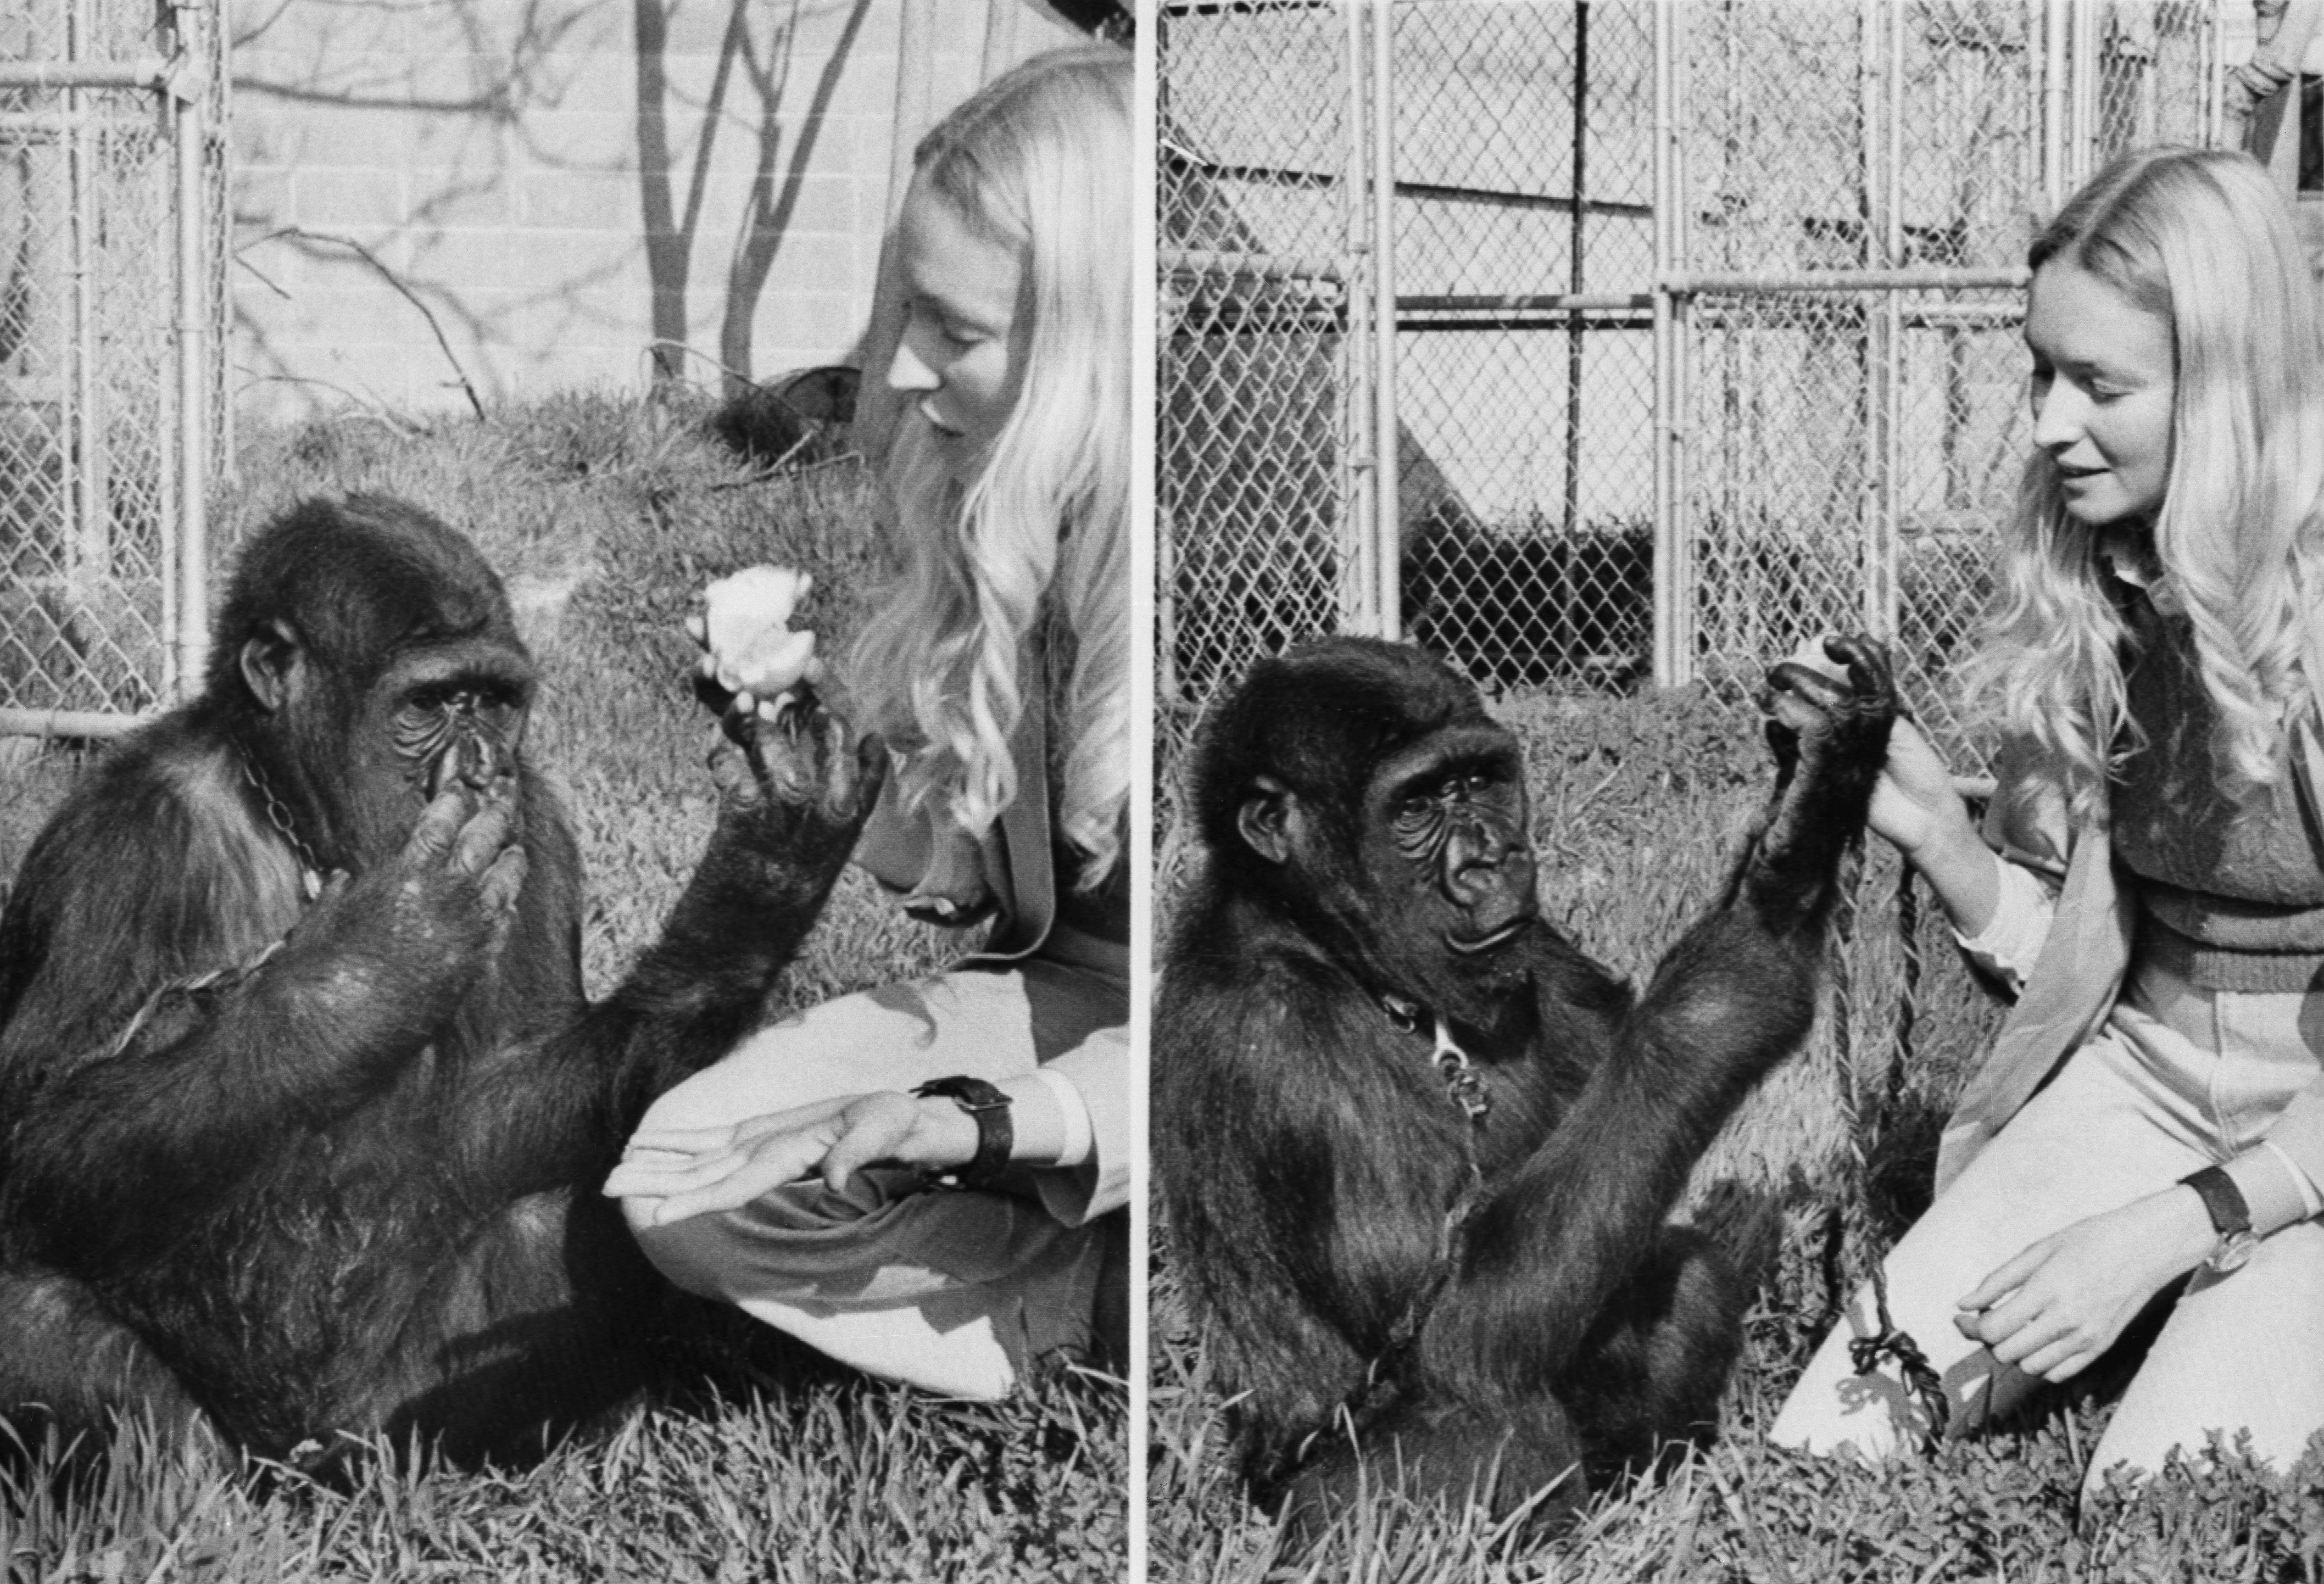 In several previous experiments, sign language has been taught to chimpanzees, but this is the first real attempt with a gorilla. At left, Koko indicates "eat" with bunched fingertips to her lips and gets her prize (right). The experiment began in a mobile home at San Francisco Zoo. Now the mobile home is established with its own fenced yard on the Stanford Campus. (Bettmann&mdash;Bettmann Archive)